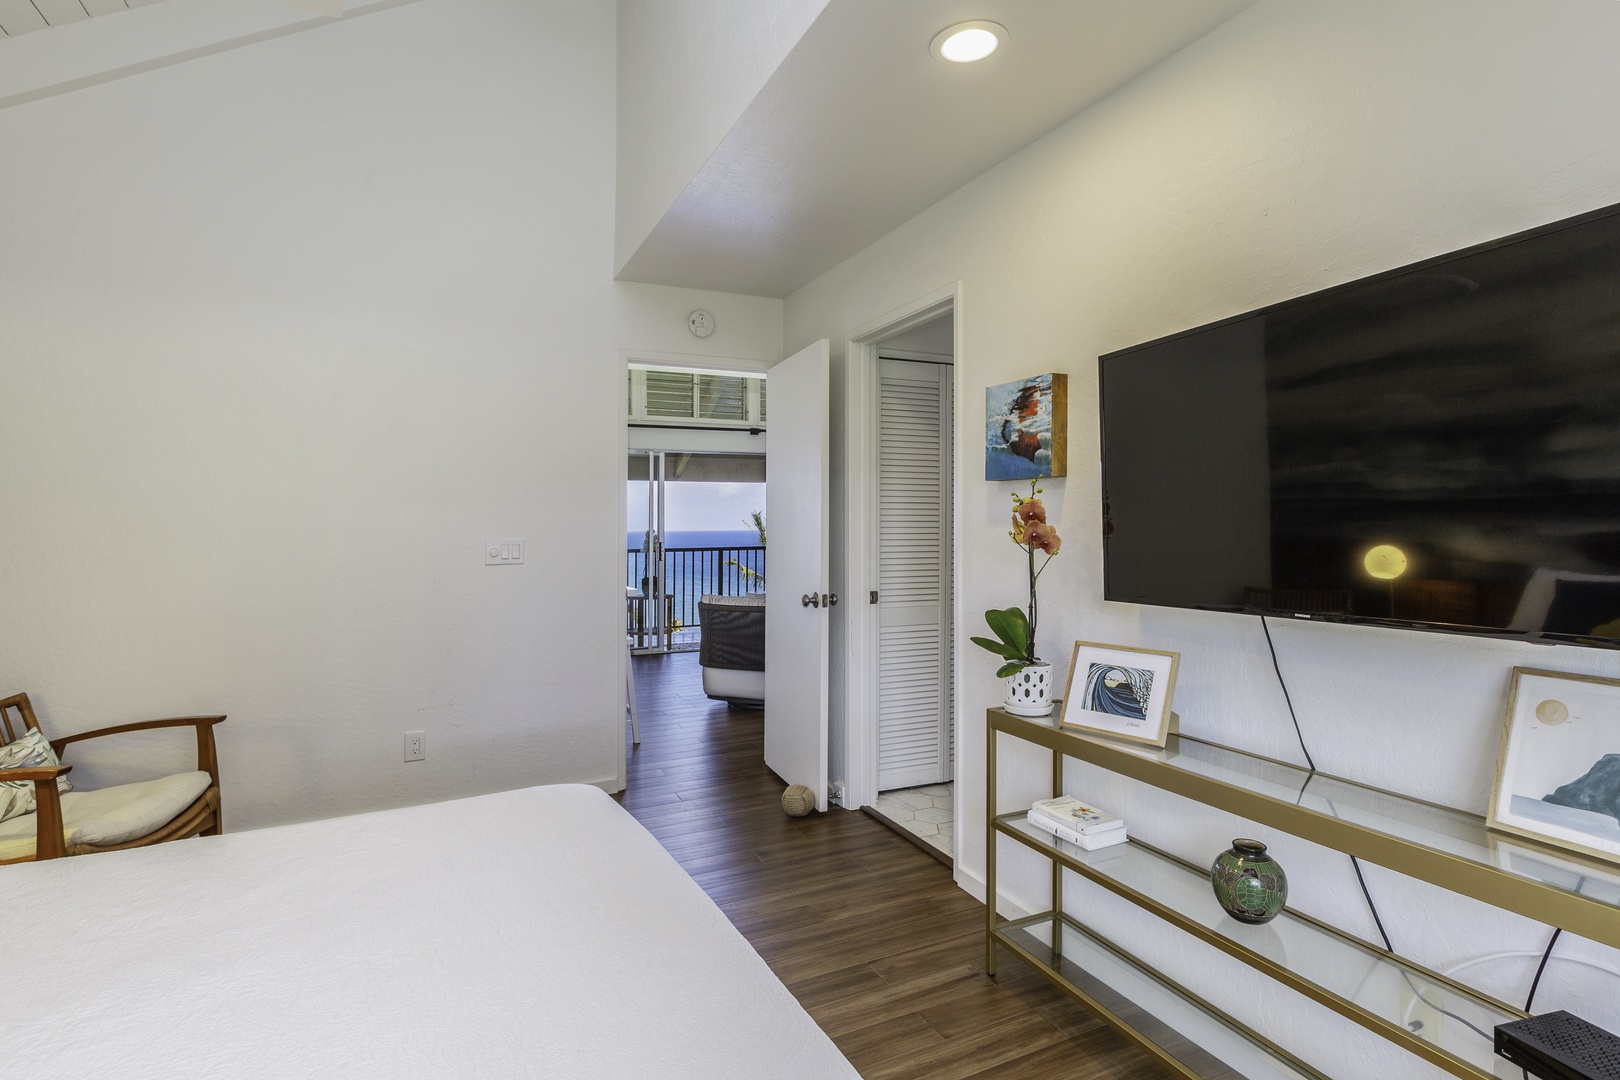 Princeville Vacation Rentals, Pali Ke Kua 207 - The primary bedroom also boasts a new smart TV for winding down after a day of adventure